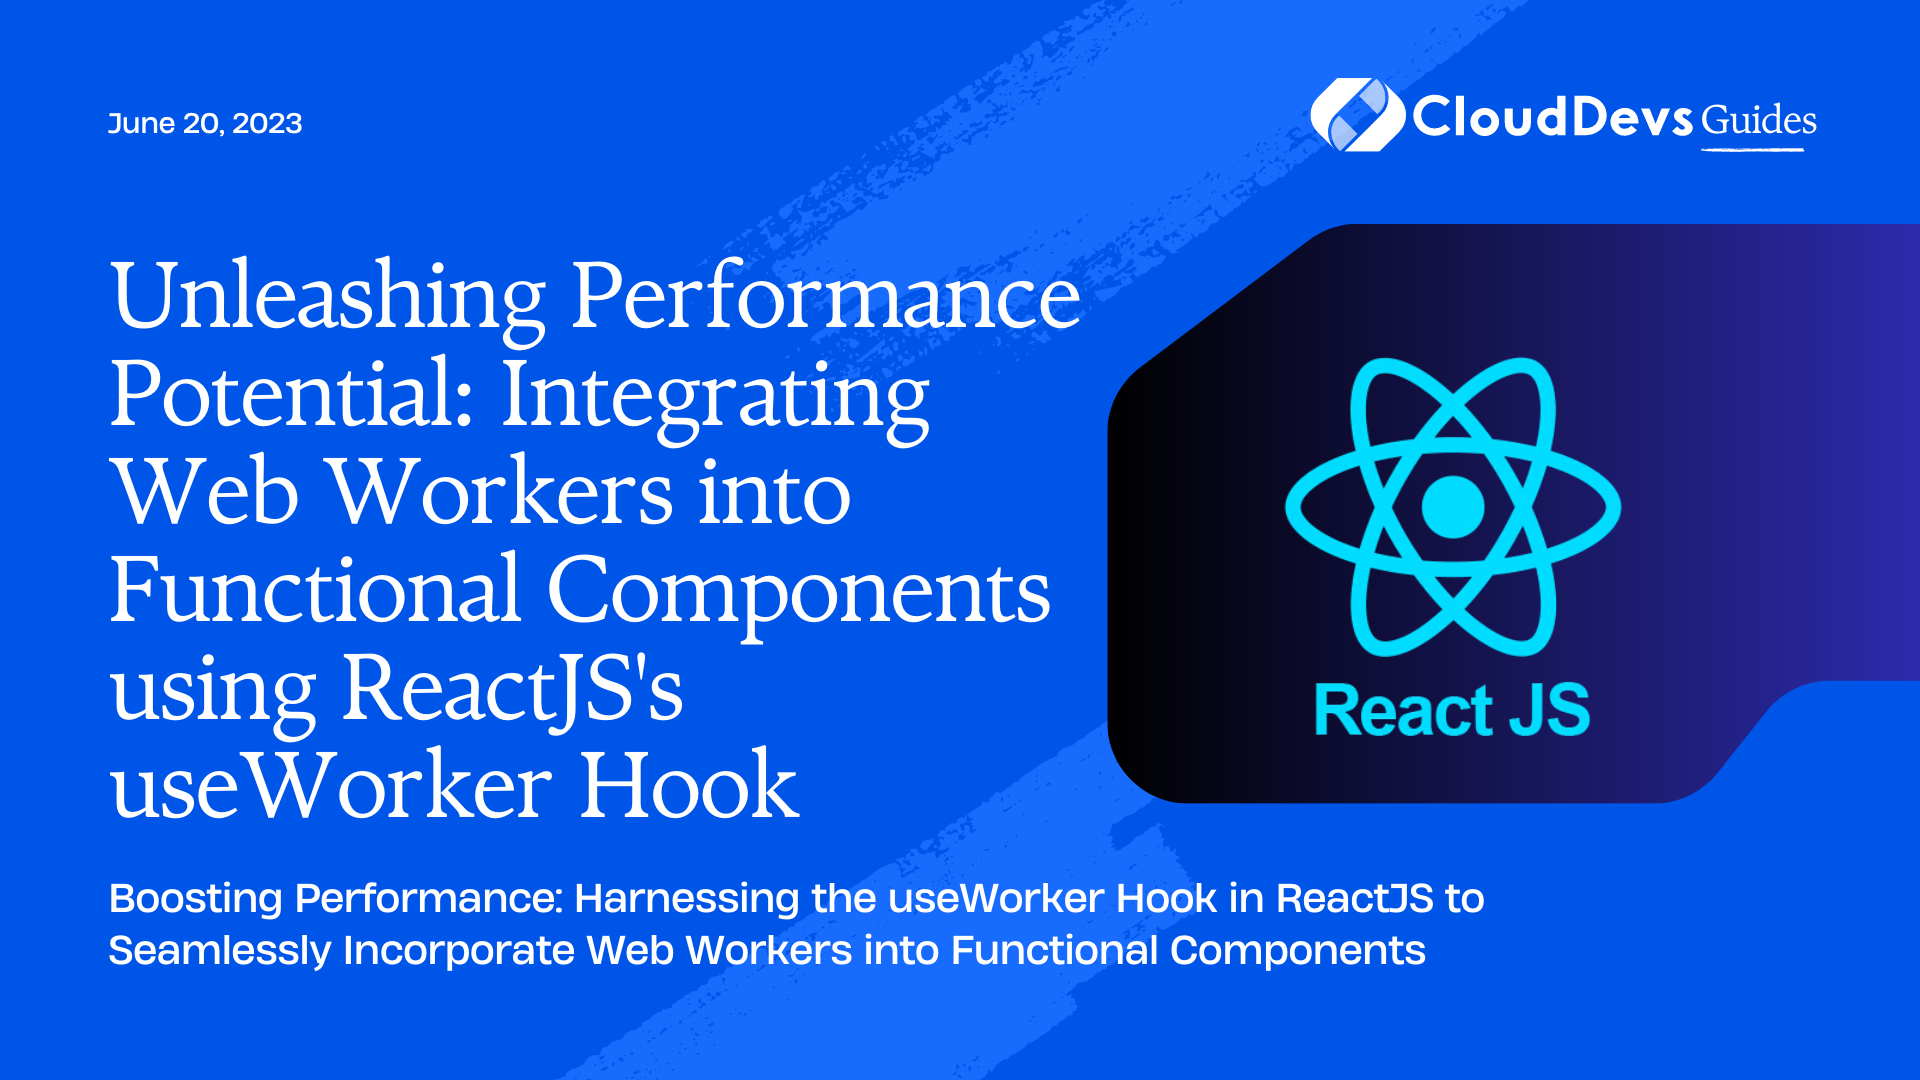 Unleashing Performance Potential: Integrating Web Workers into Functional Components using ReactJS's useWorker Hook